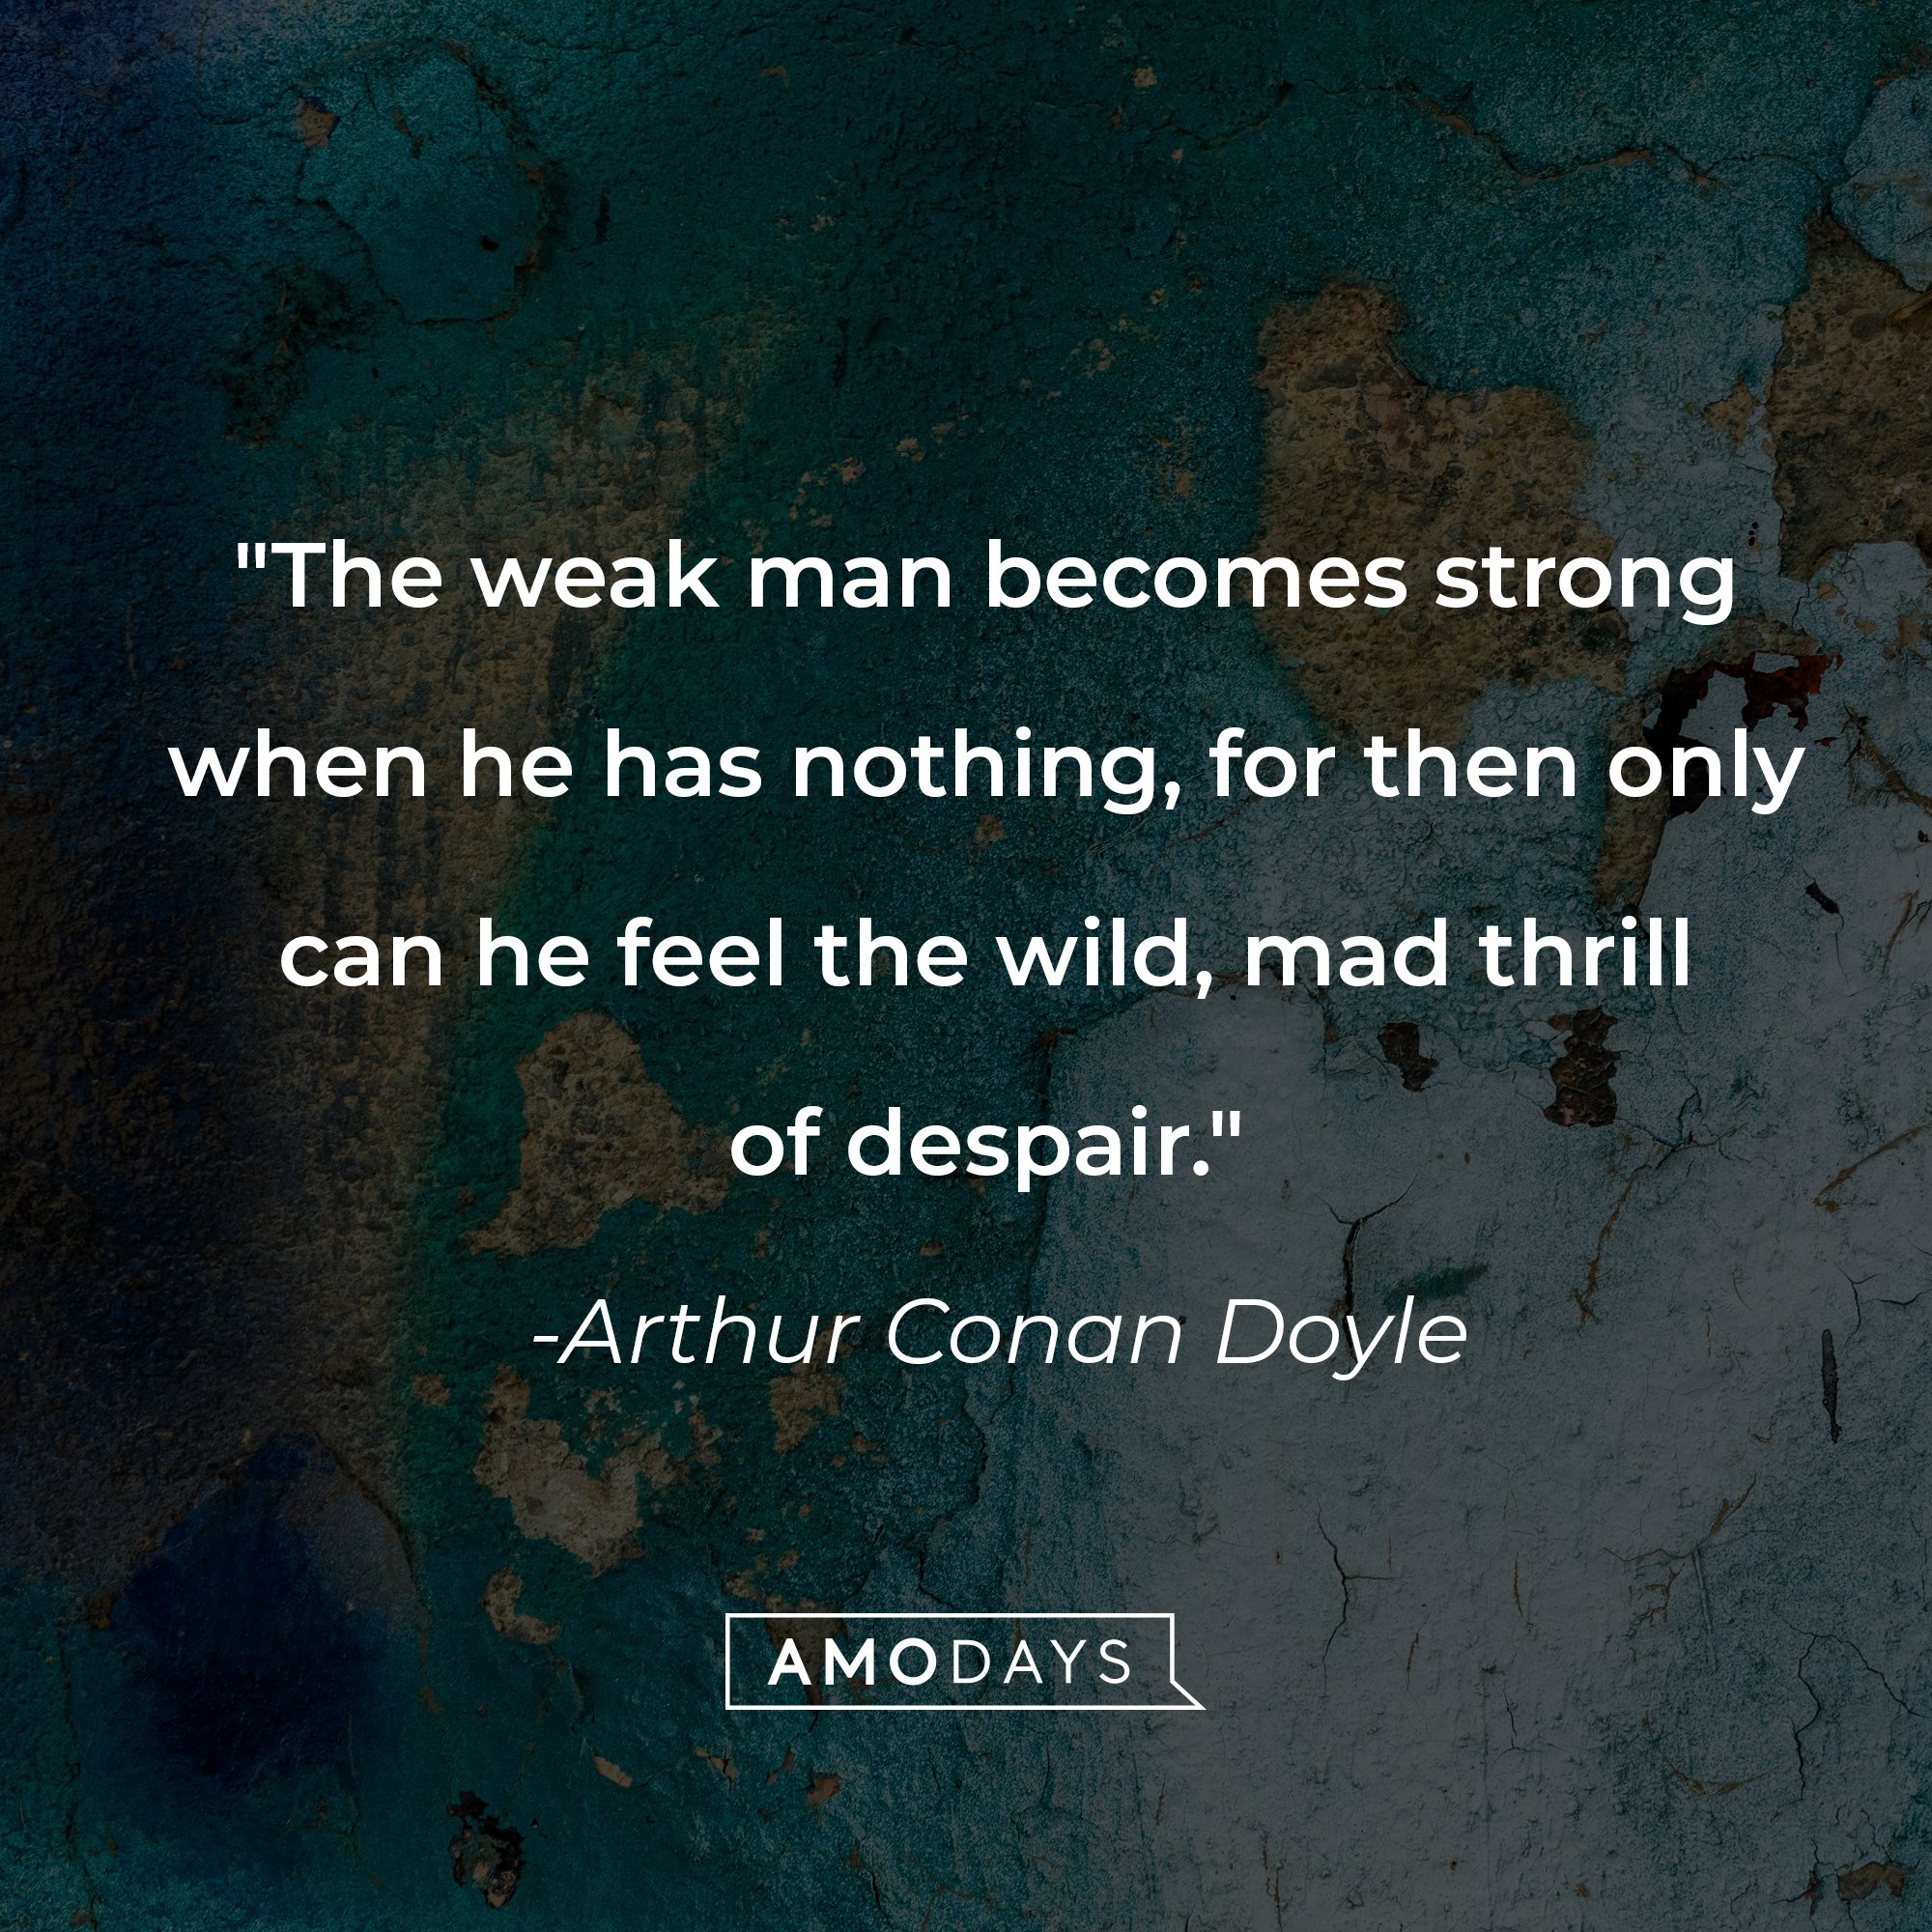 Arthur Conan Doyle's quote: "The weak man becomes strong when he has nothing, for then only can he feel the wild, mad thrill of despair." | Image: AmoDays